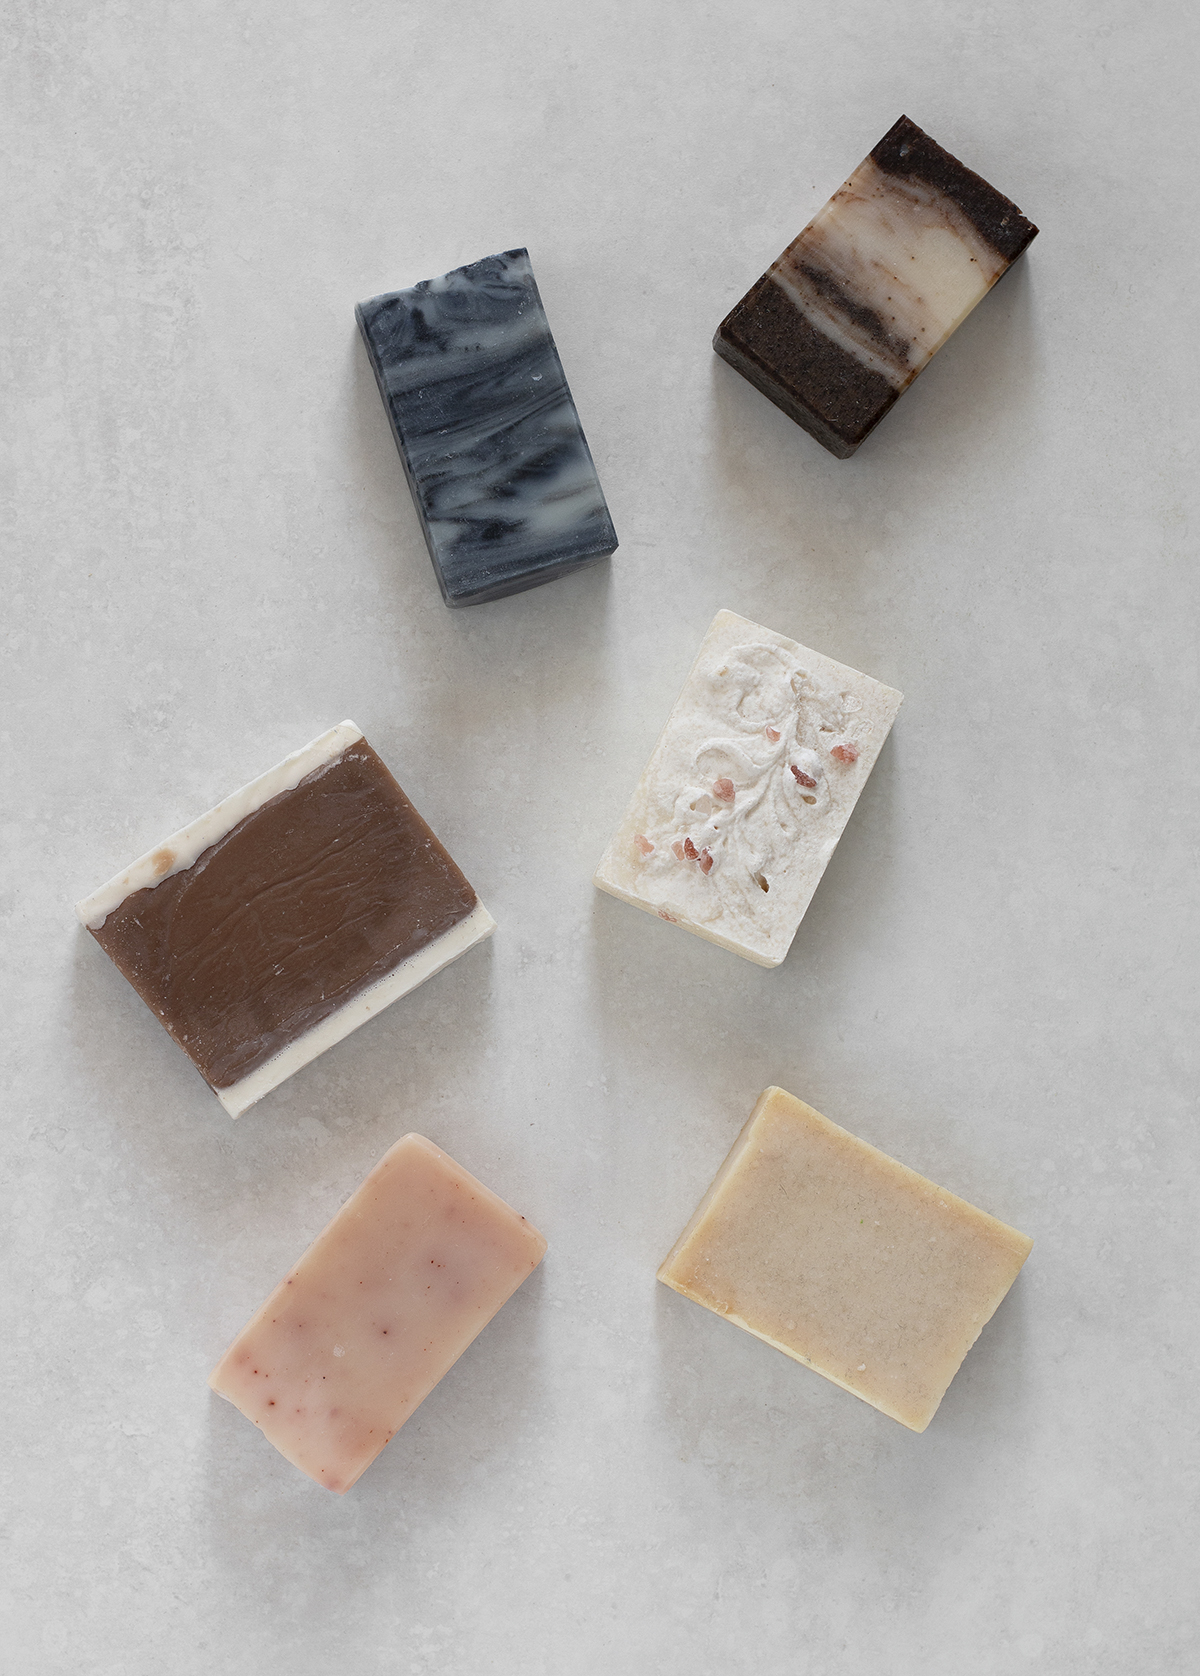 The ultimate guide to bar soaps